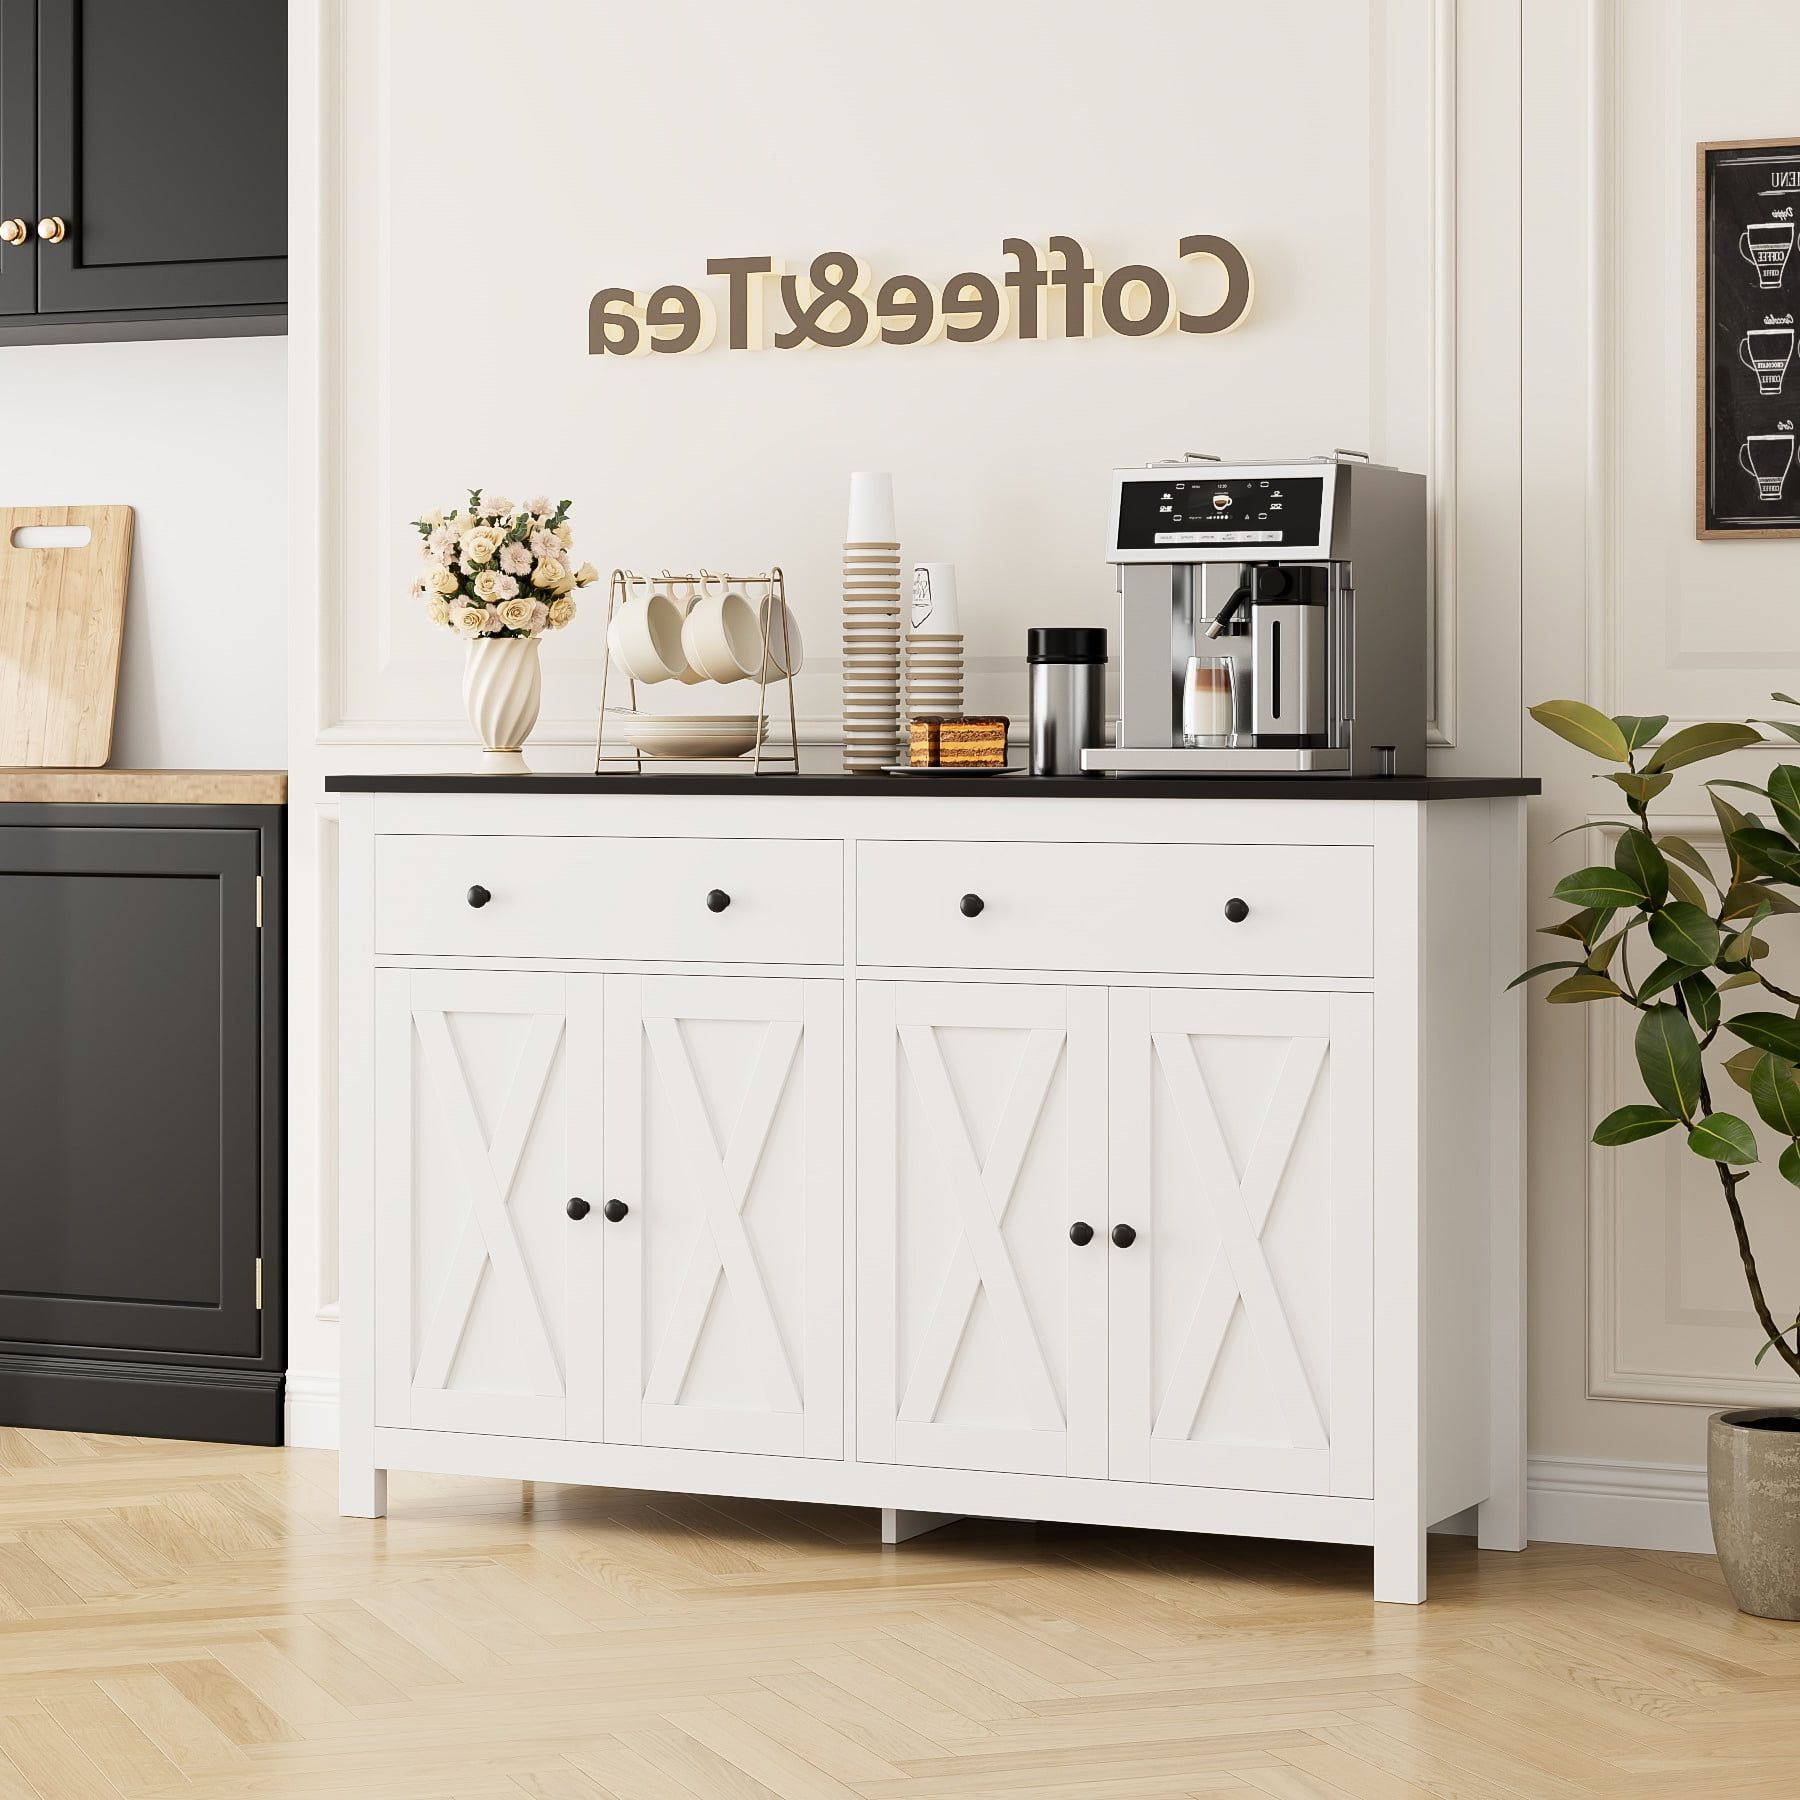 Homfa 4 Doors With 2 Drawers Farmhouse Storage Cabinet, Wood Kitchen  Sideboard With Adjustable Shelves, White Black – Walmart With Regard To Sideboards With Adjustable Shelves (Gallery 4 of 20)